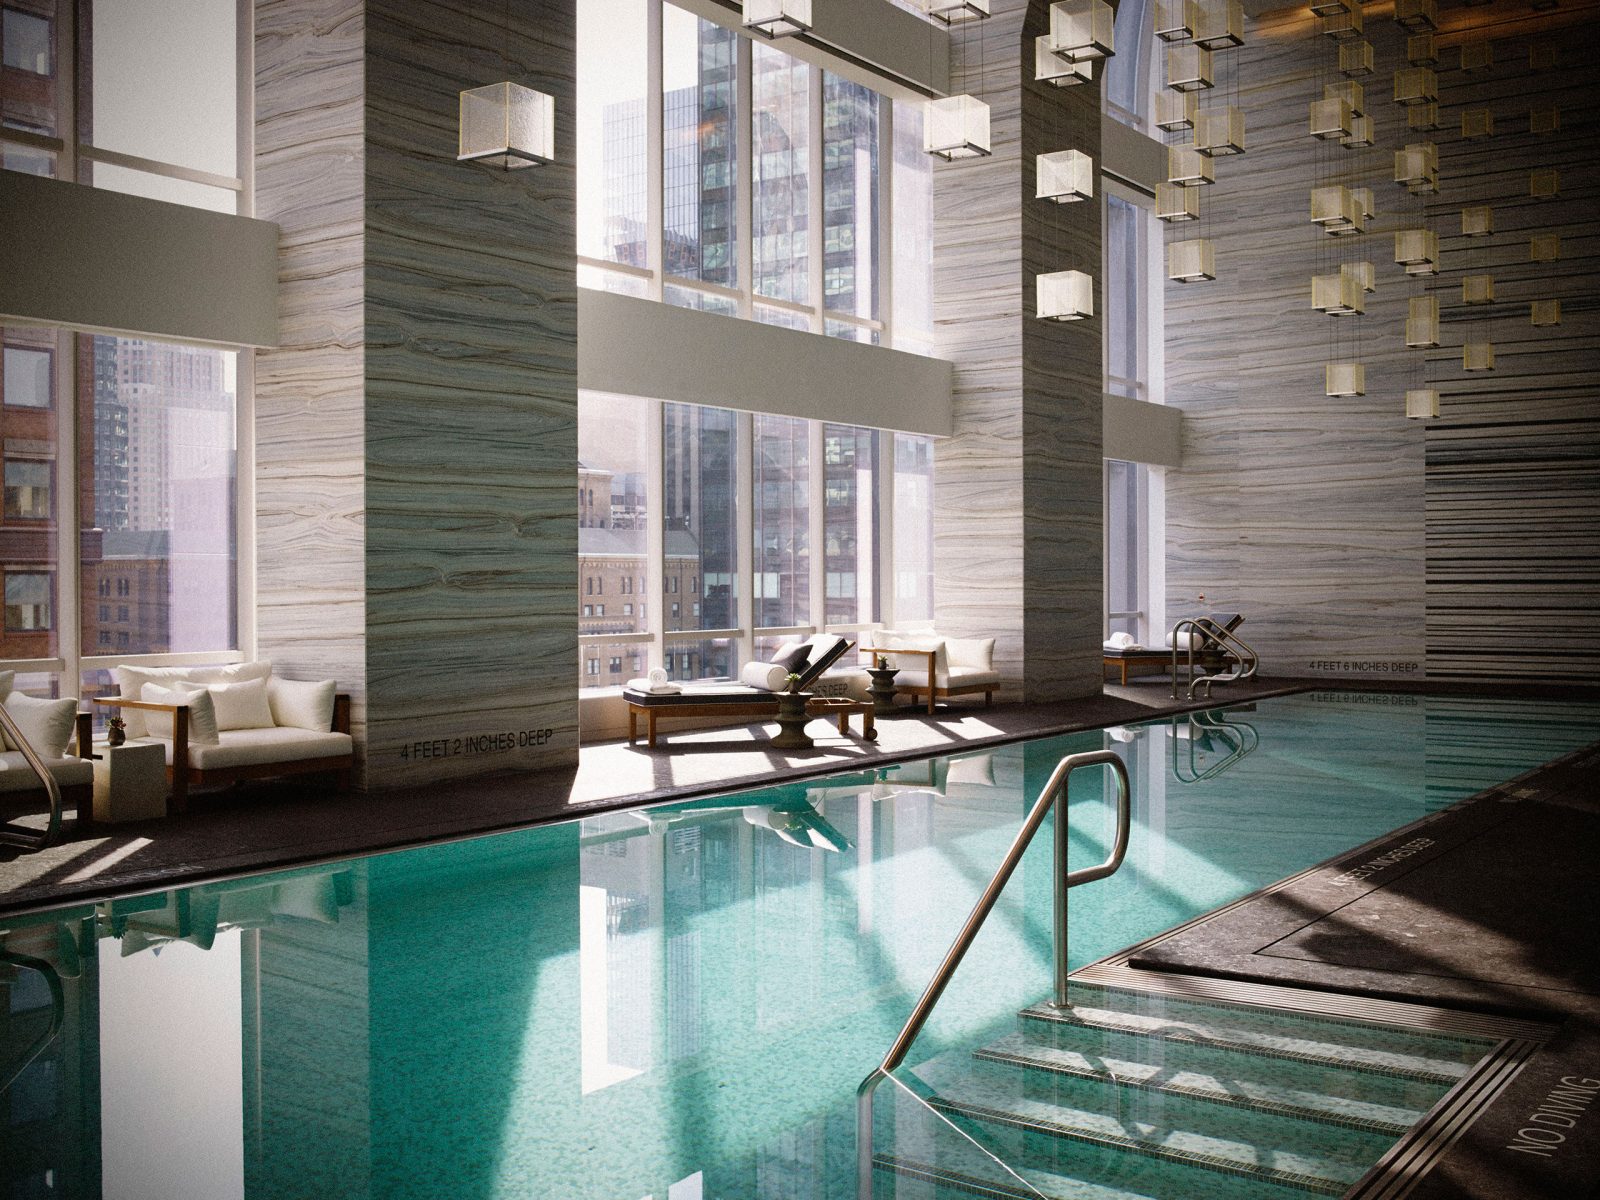 Most Guests Mention the Pool and Its' Incredible Views as Their Favorite Part of Staying at The Park Hyatt Hotel.